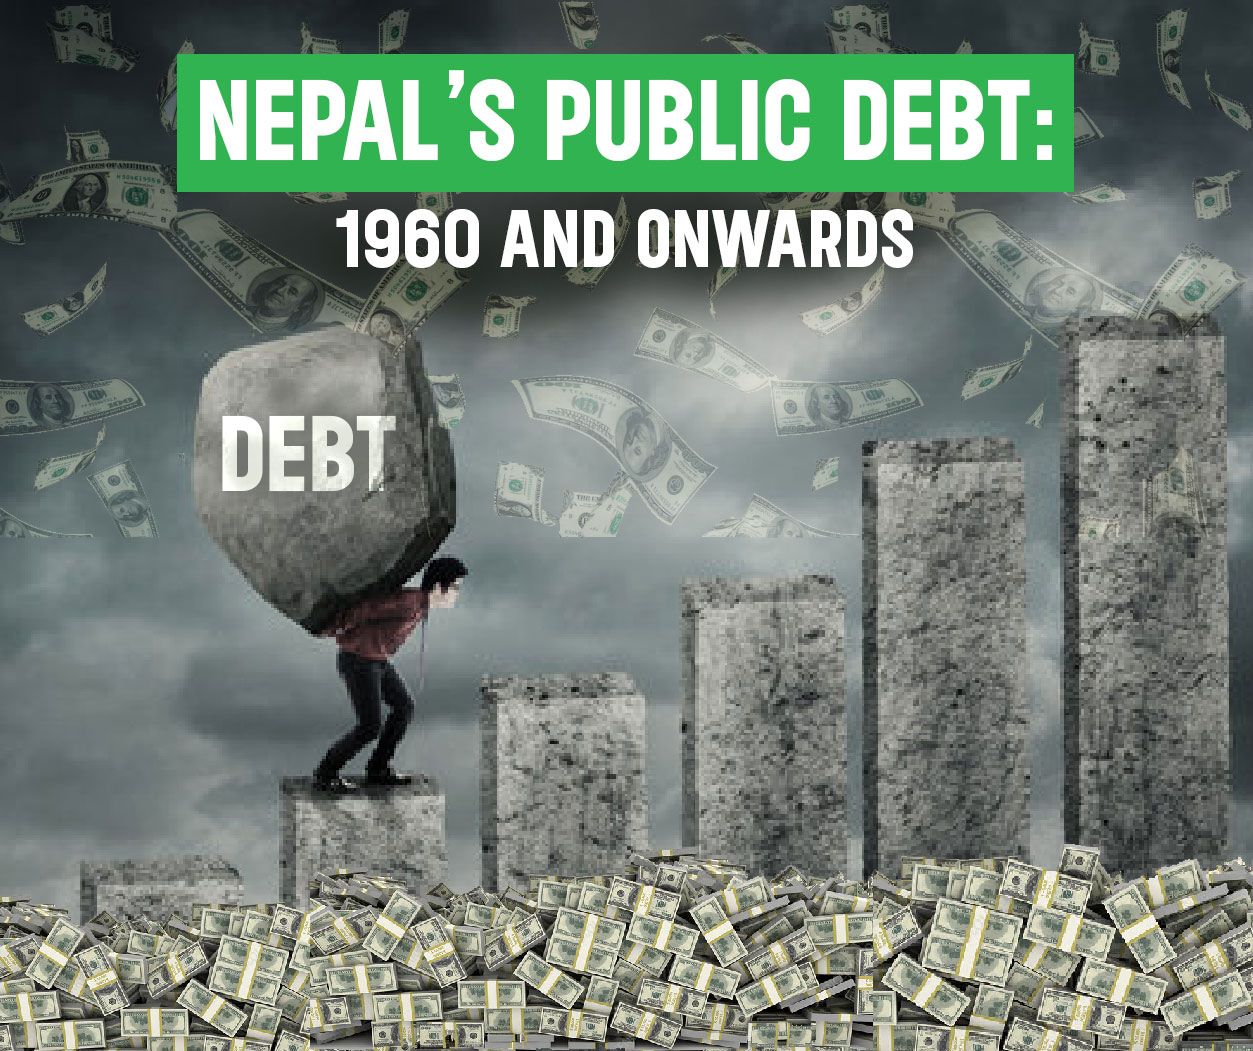 Nepal’s Public Debt: 1960 and onwards